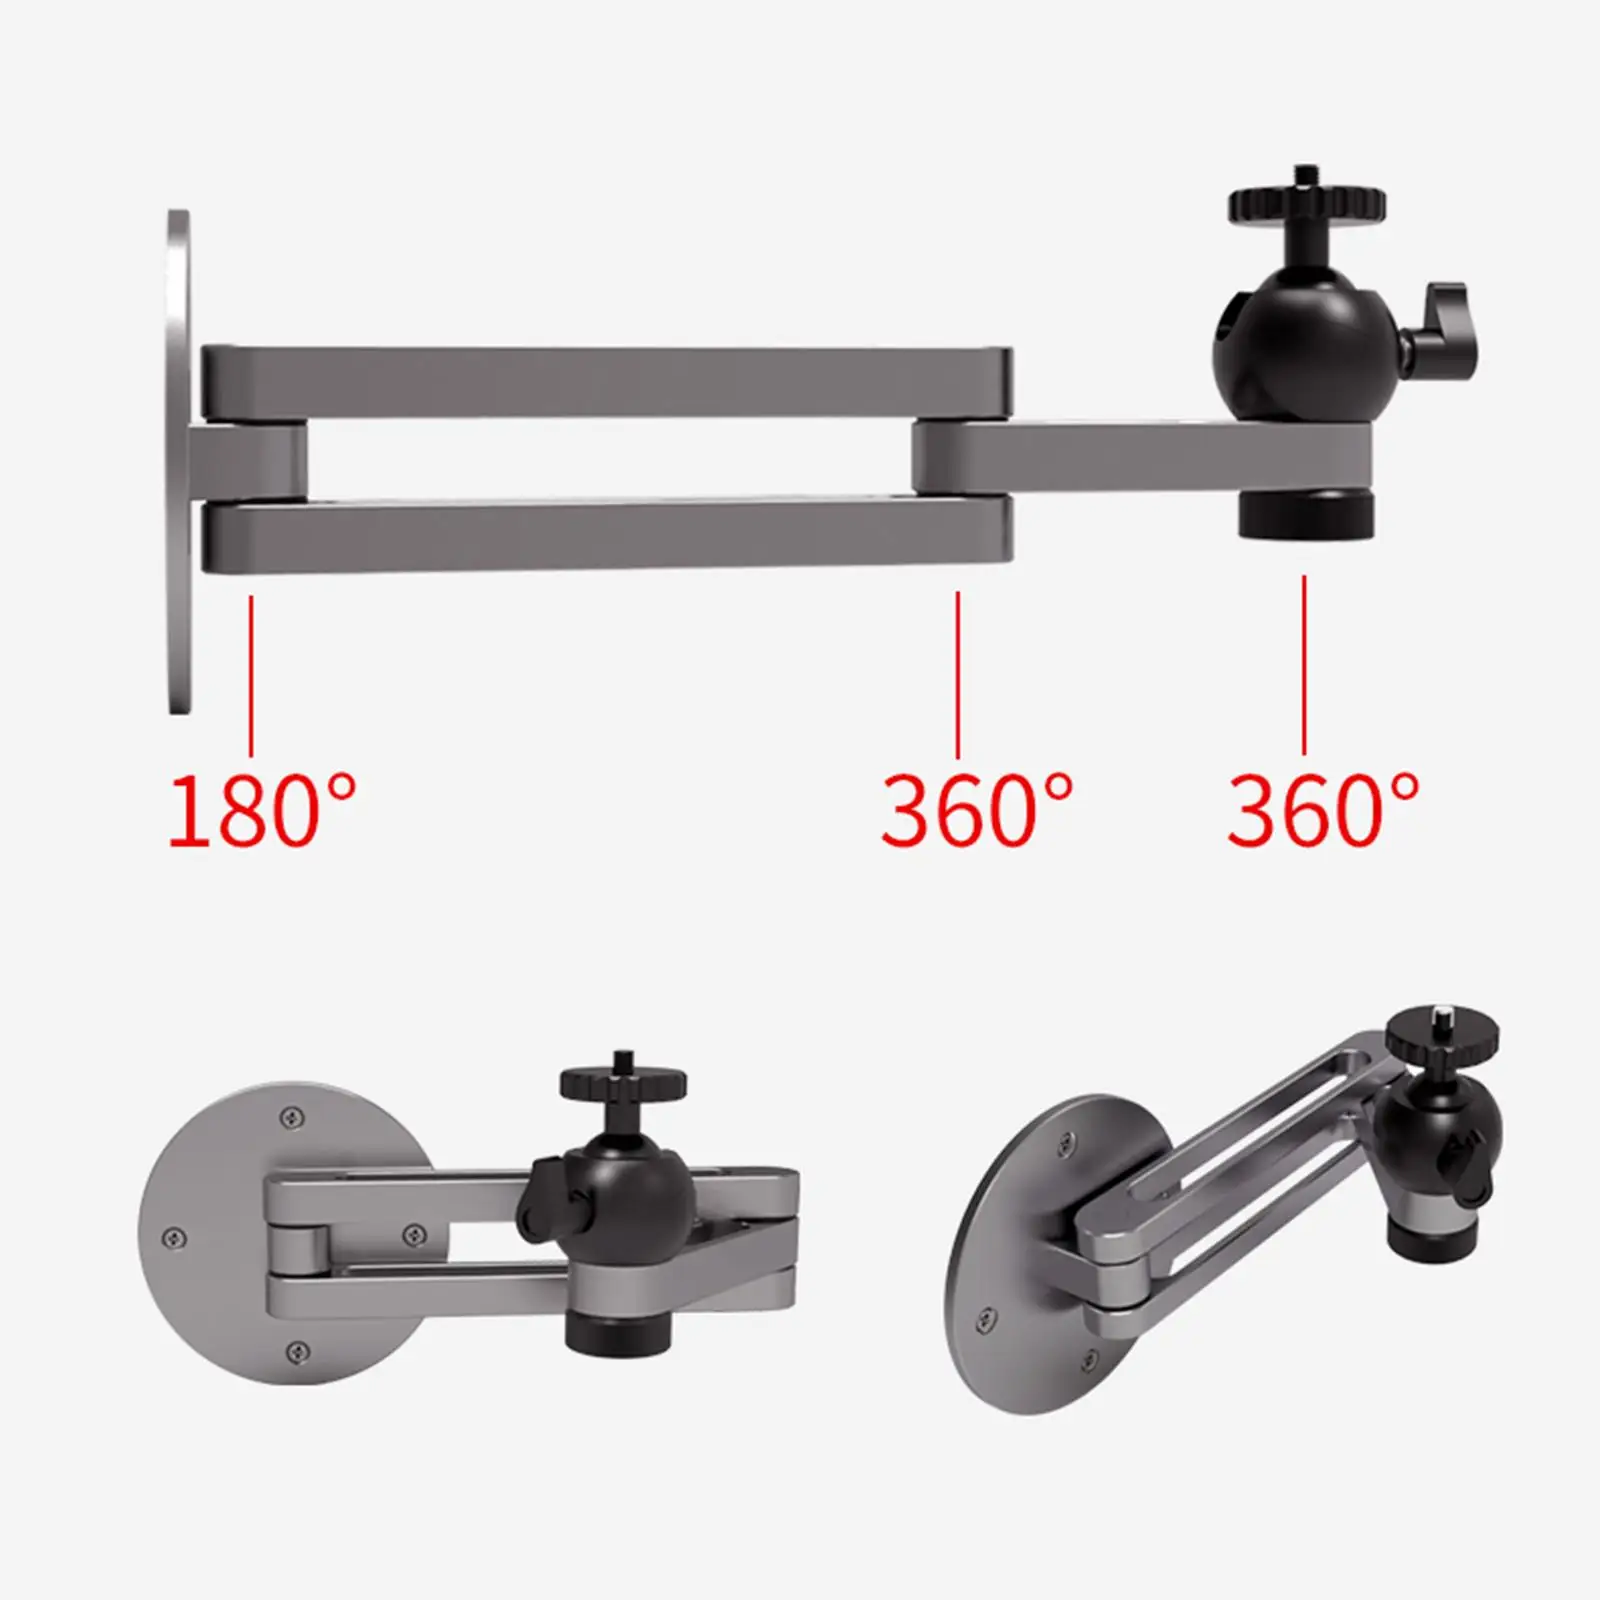 Universal Wall Mount Bracket 360Swivel Aluminum Alloy Ceiling Bracket Wall Support Projector Stand for Bedside Bedroom Ceiling